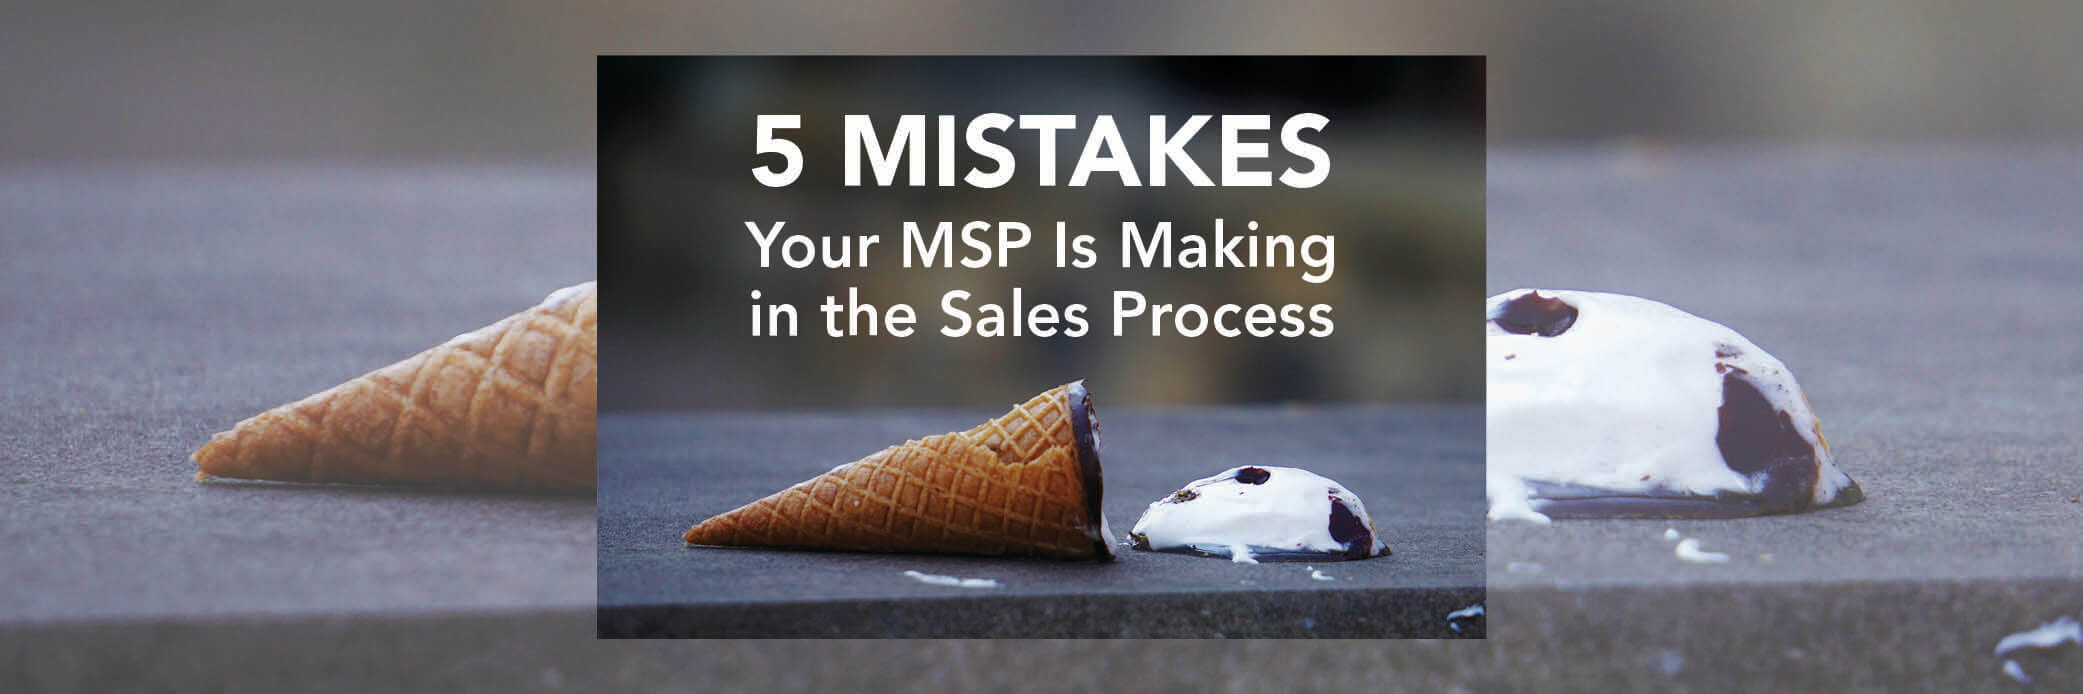 5 Mistakes Your MSP Is Making in the Sales Process